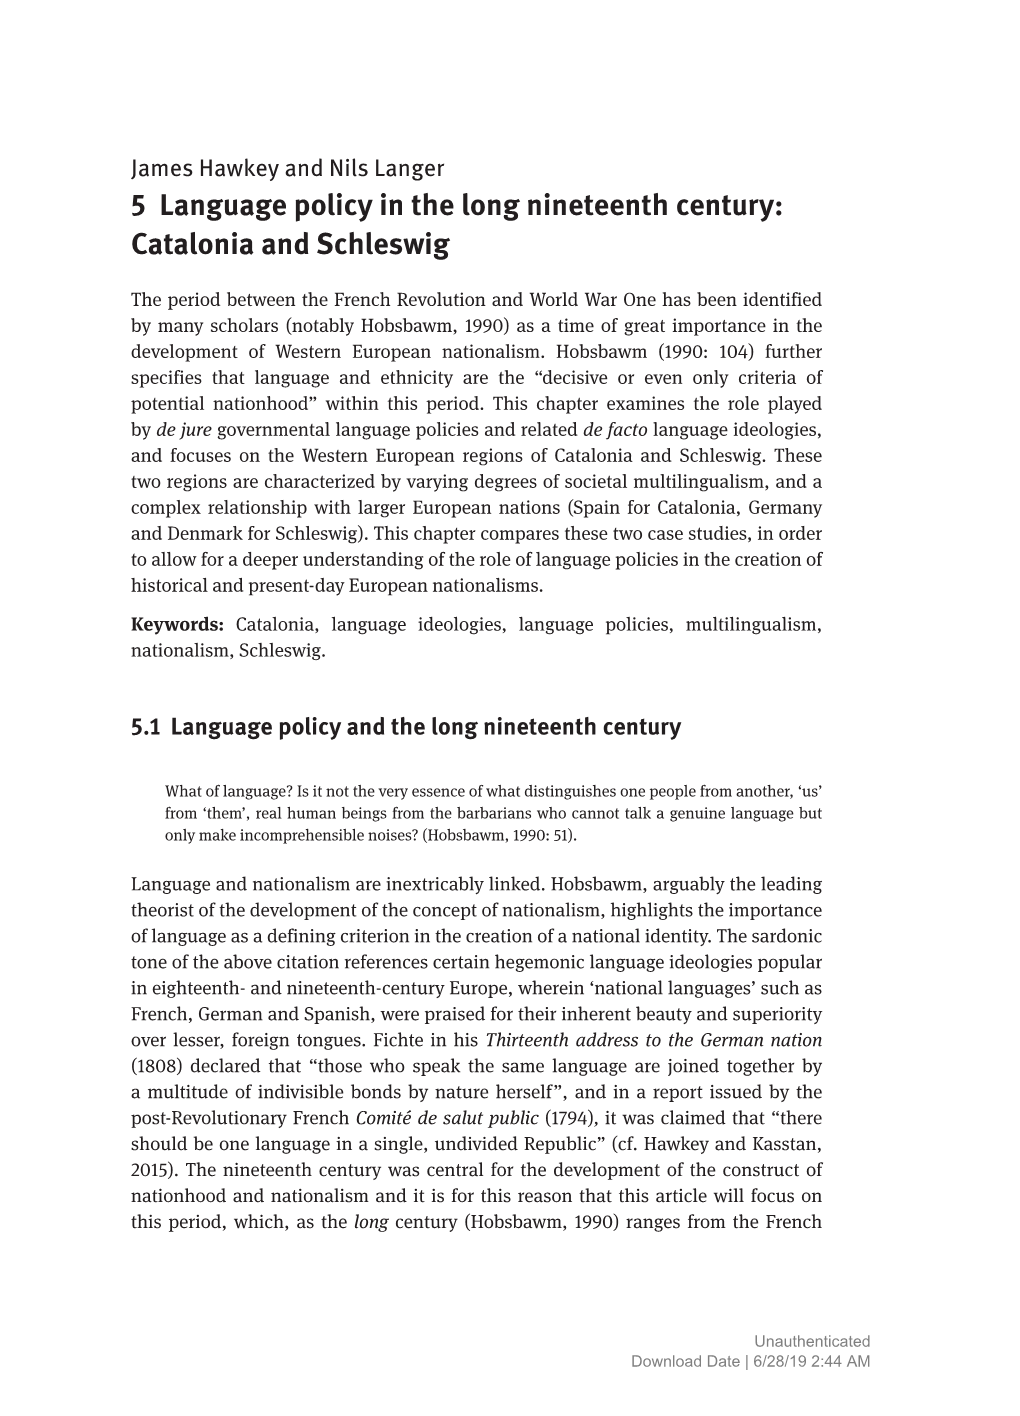 5 Language Policy in the Long Nineteenth Century: Catalonia and Schleswig